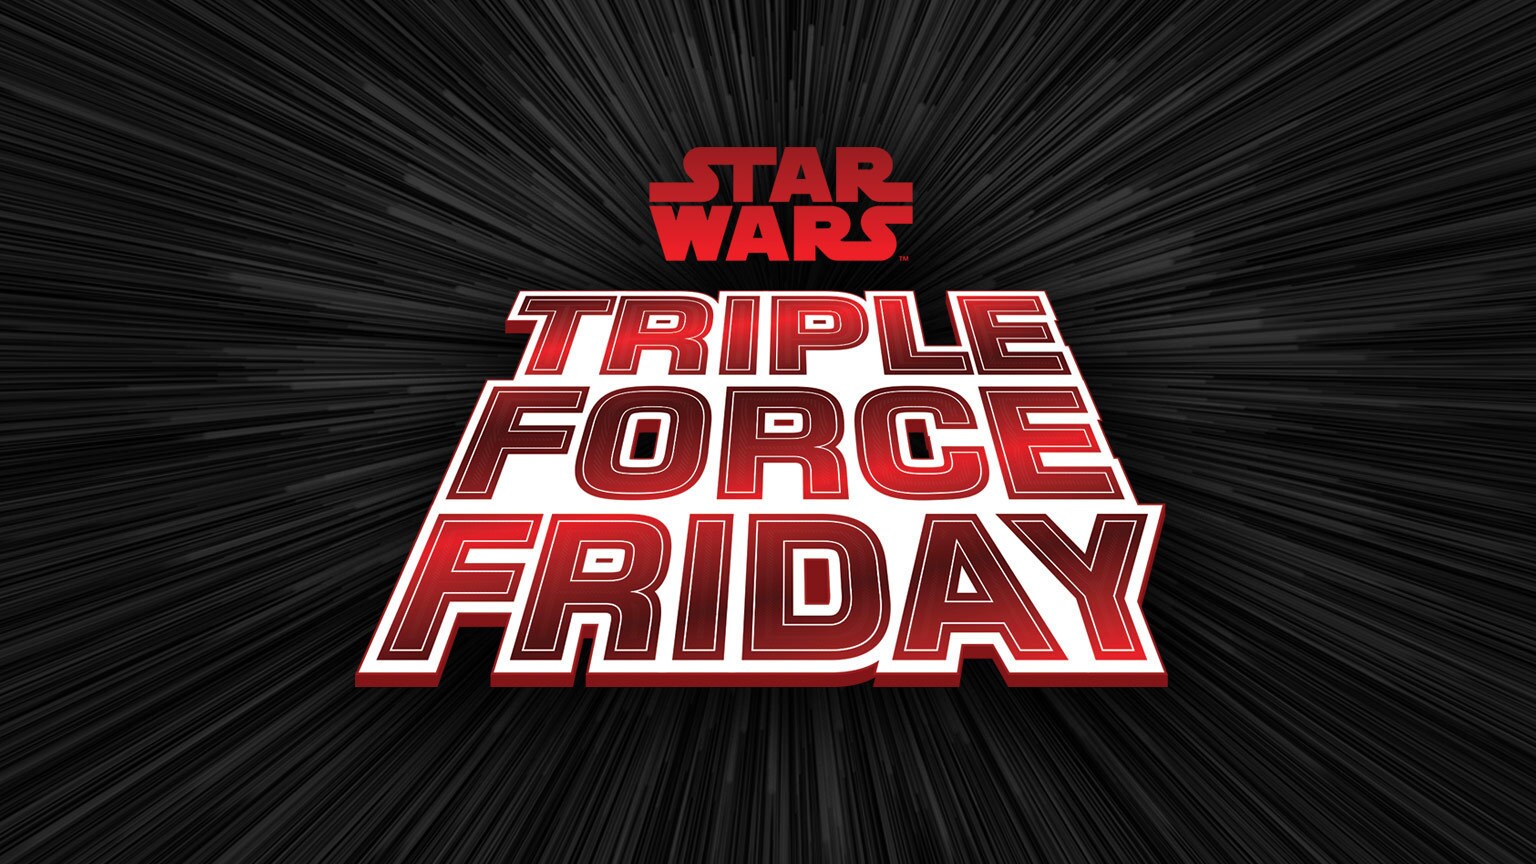 A Galaxy of Star Wars Stars Count Down to Triple Force Friday